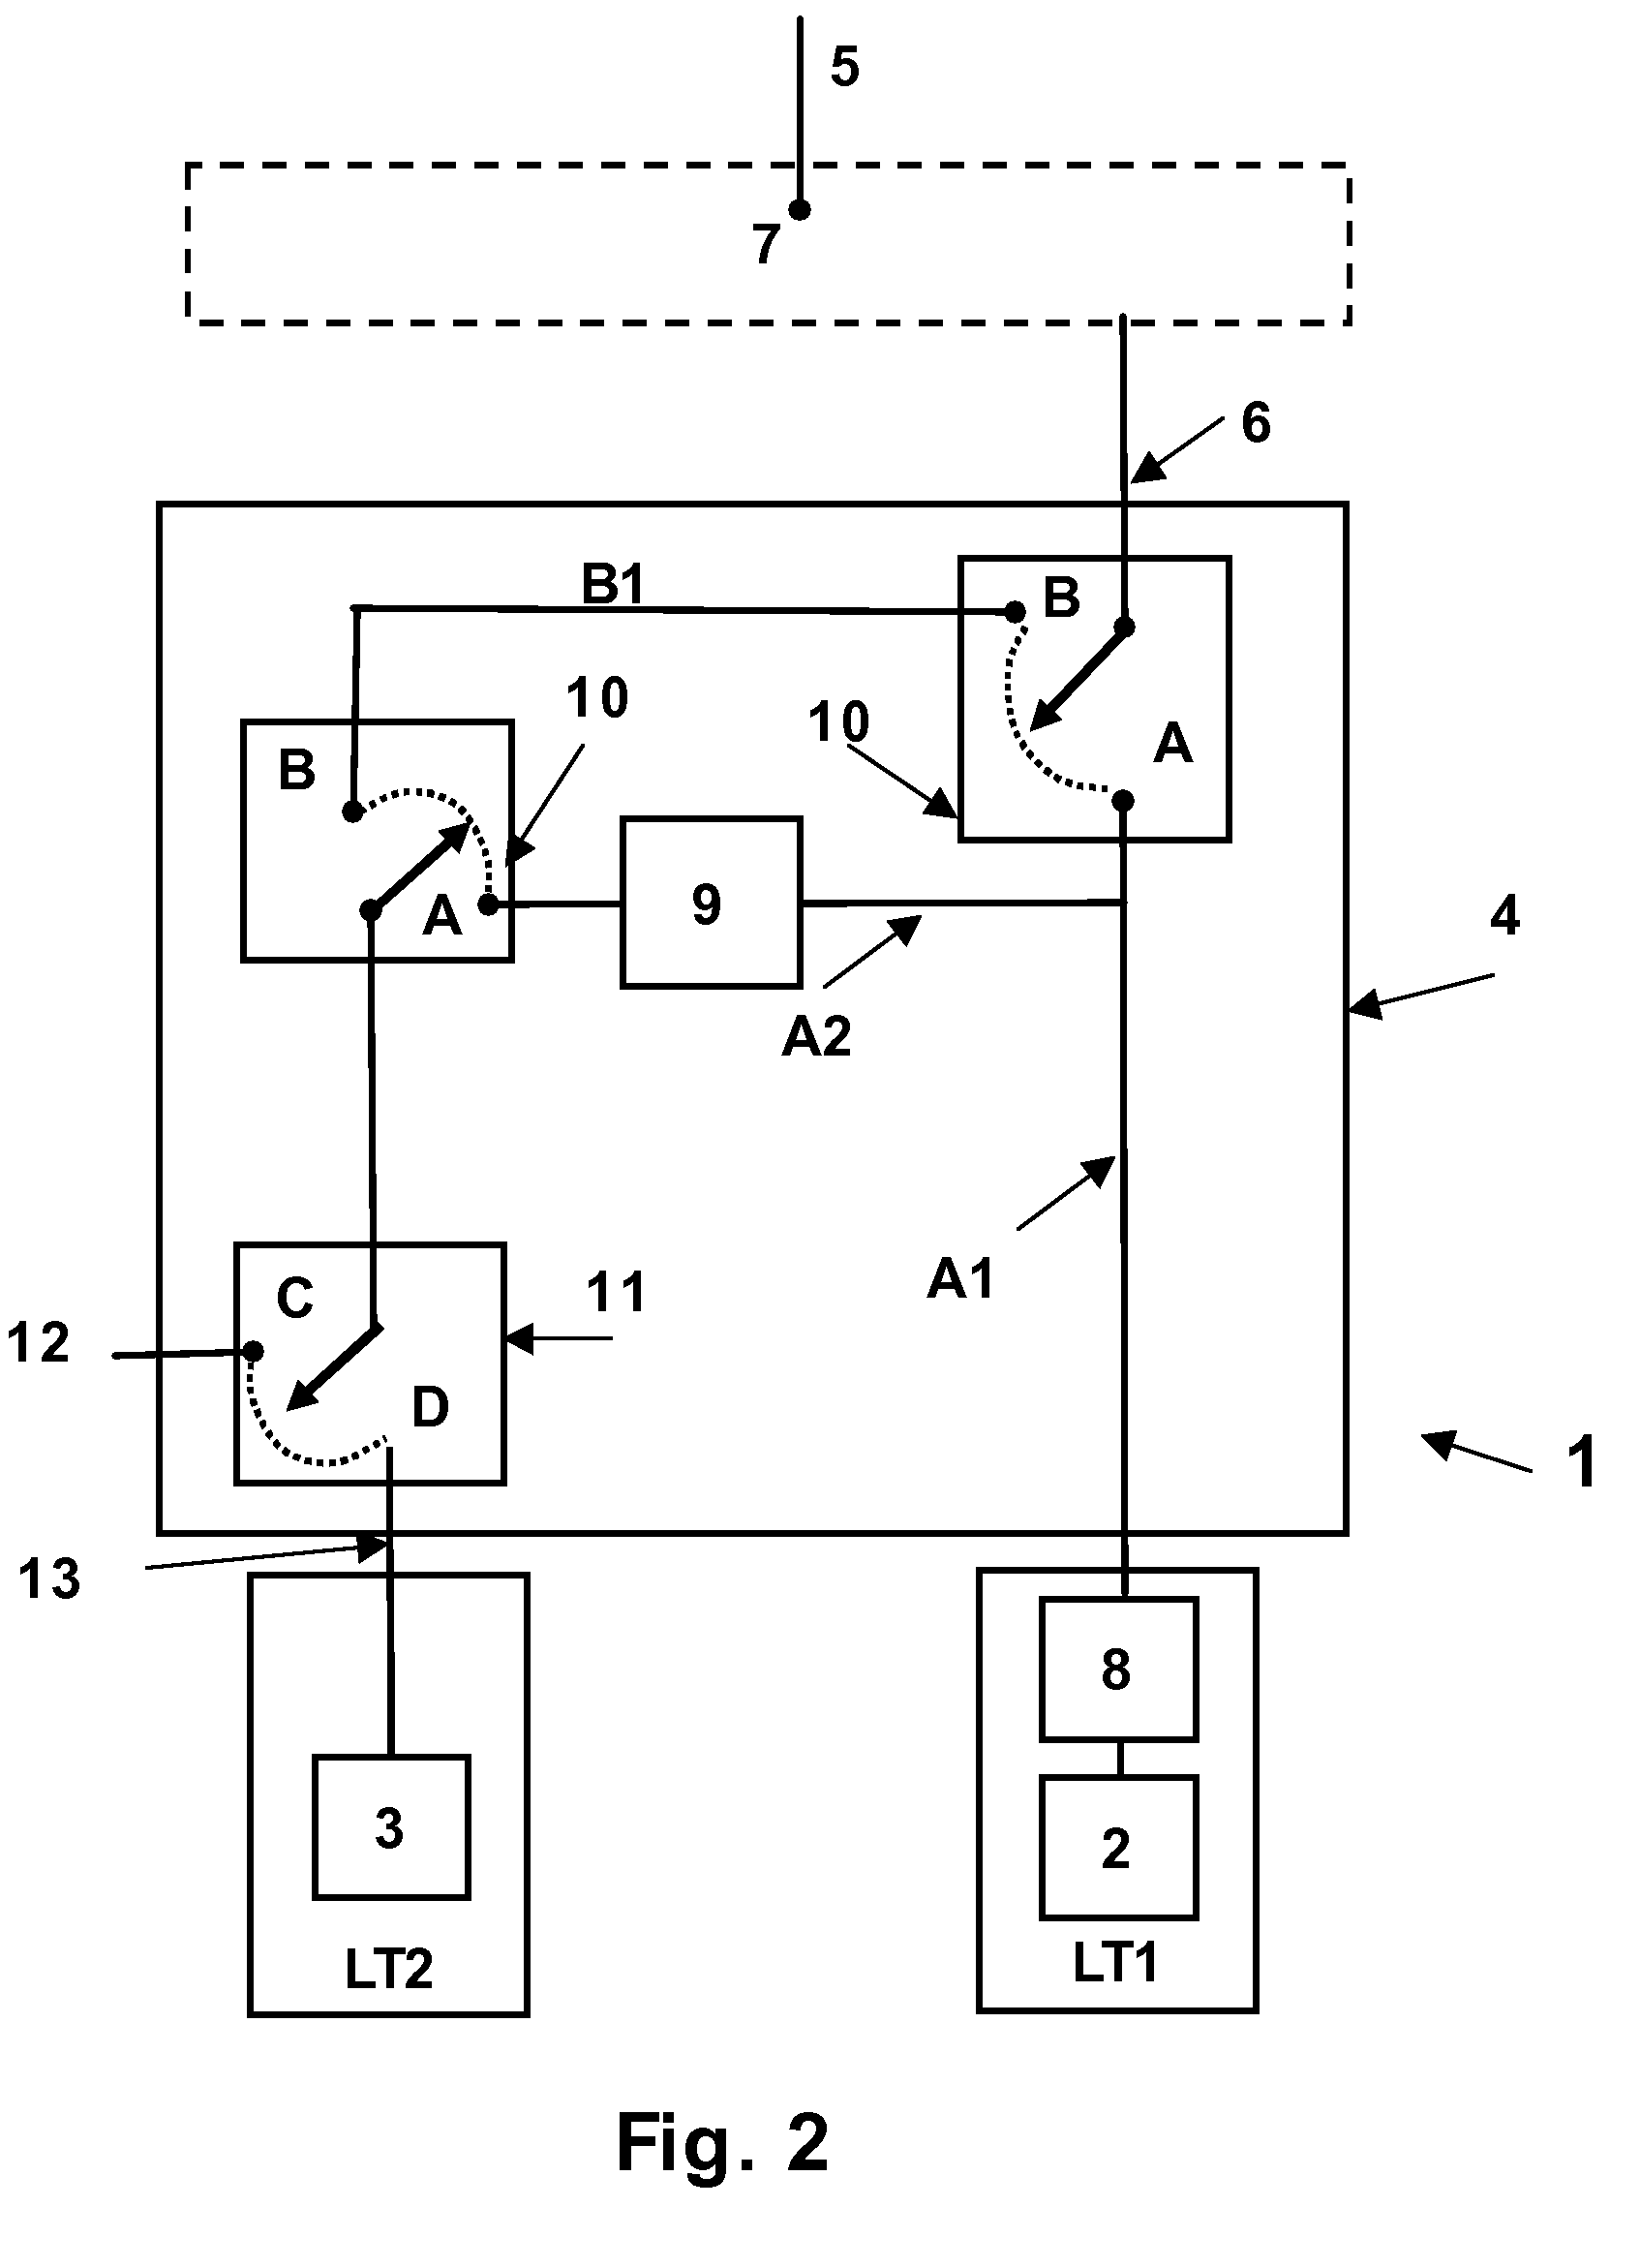 Line termination arrangement with combined broadband and narrowband services